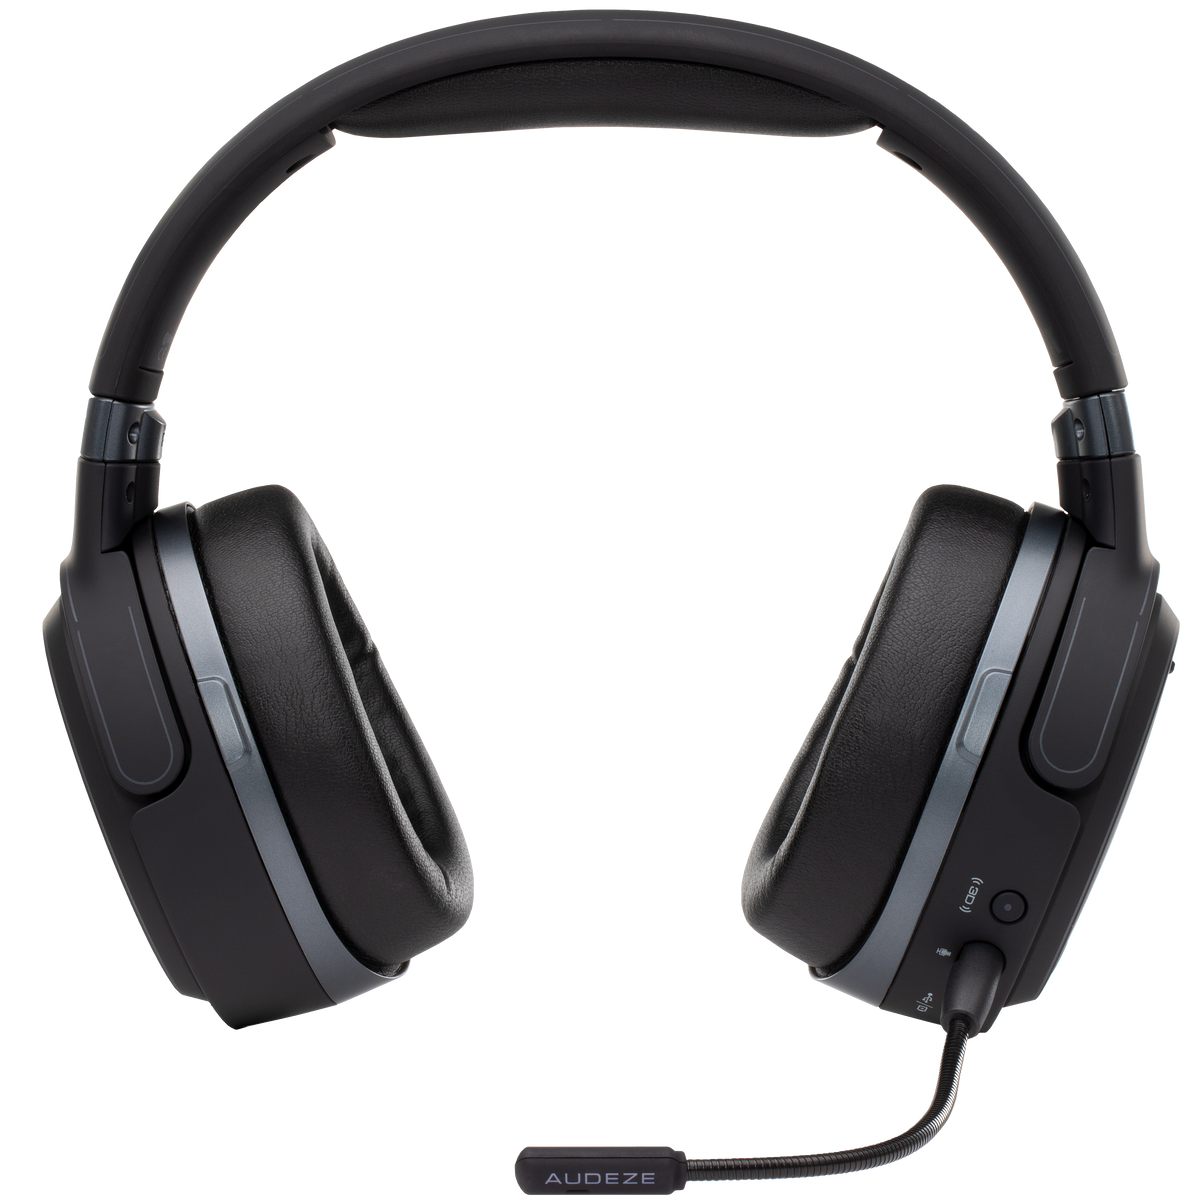 Audeze Mobius Spatial Audio Headset, Best for Immersive Gaming